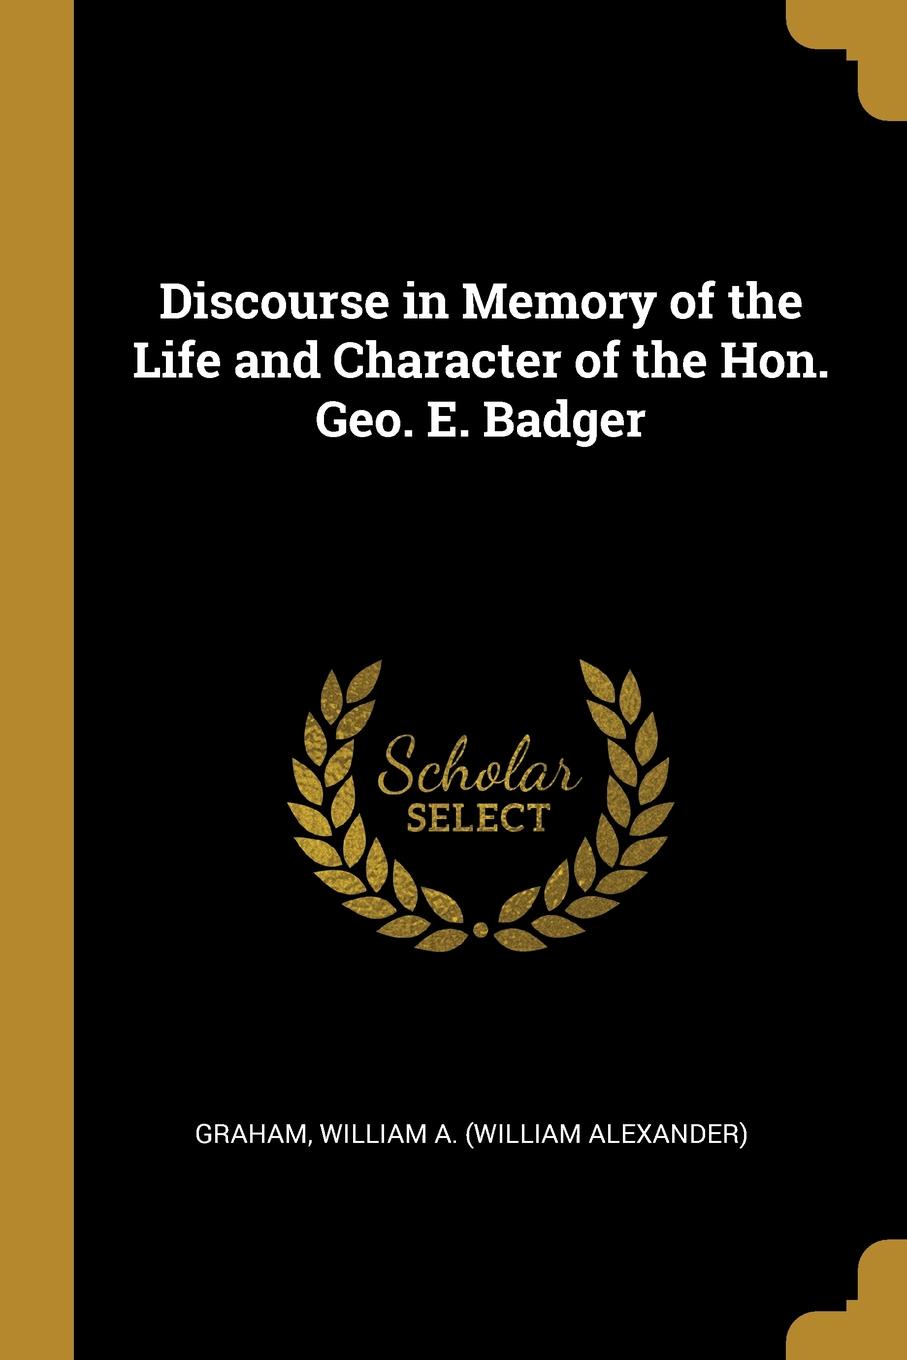 Discourse in Memory of the Life and Character of the Hon. Geo. E. Badger